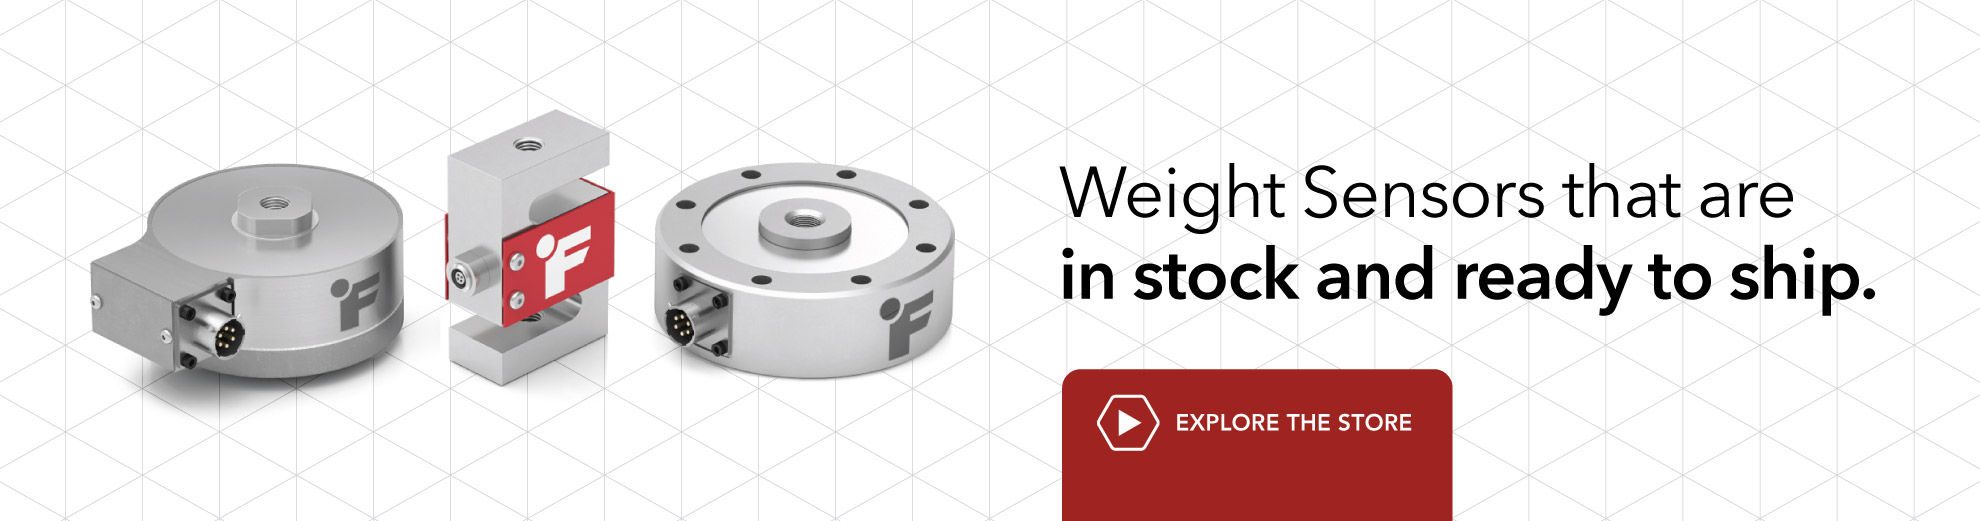 Weight Sensors that are in stock and ready to ship. Explore the store